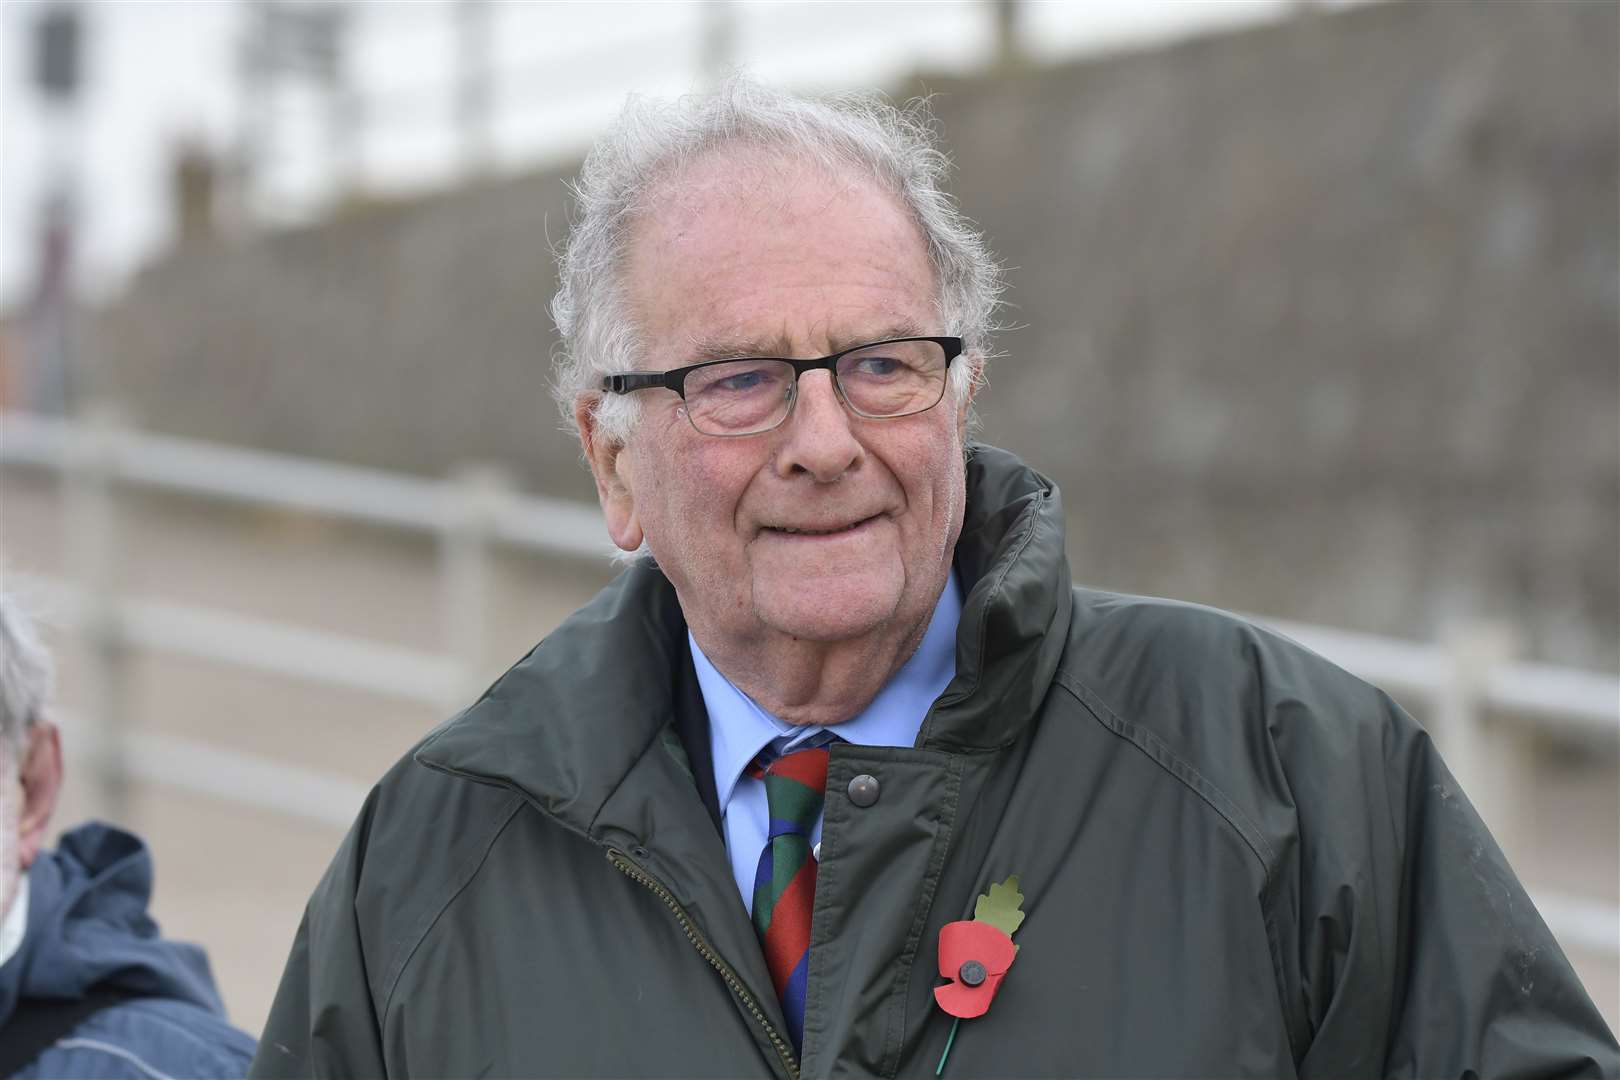 Sir Roger Gale, MP for North Thanet